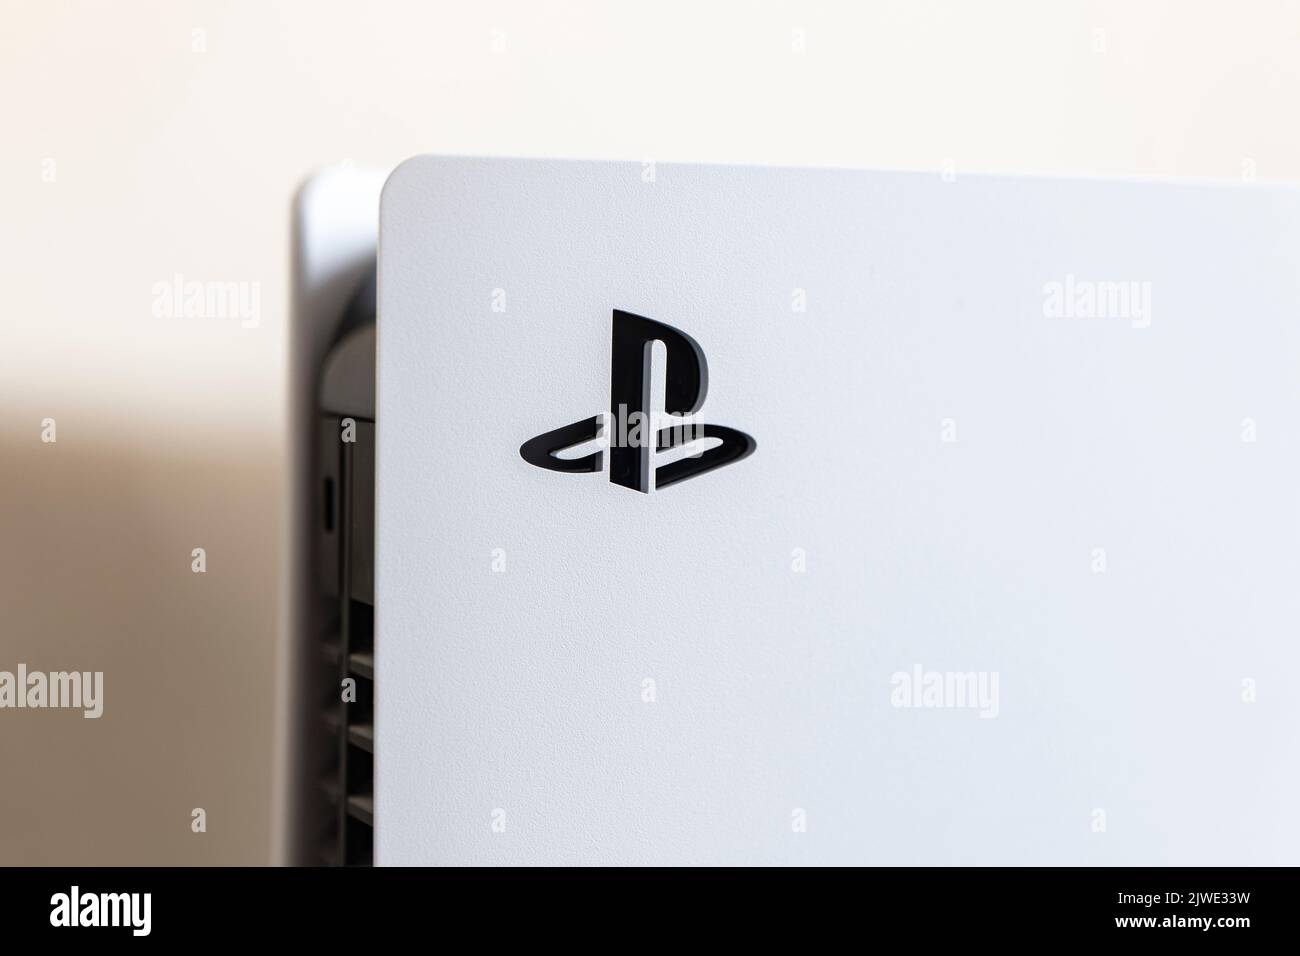 OSTRAVA, CZECH REPUBLIC - MARCH 17, 2022: Sony PlayStation 5 gaming console logo in detailed view Stock Photo